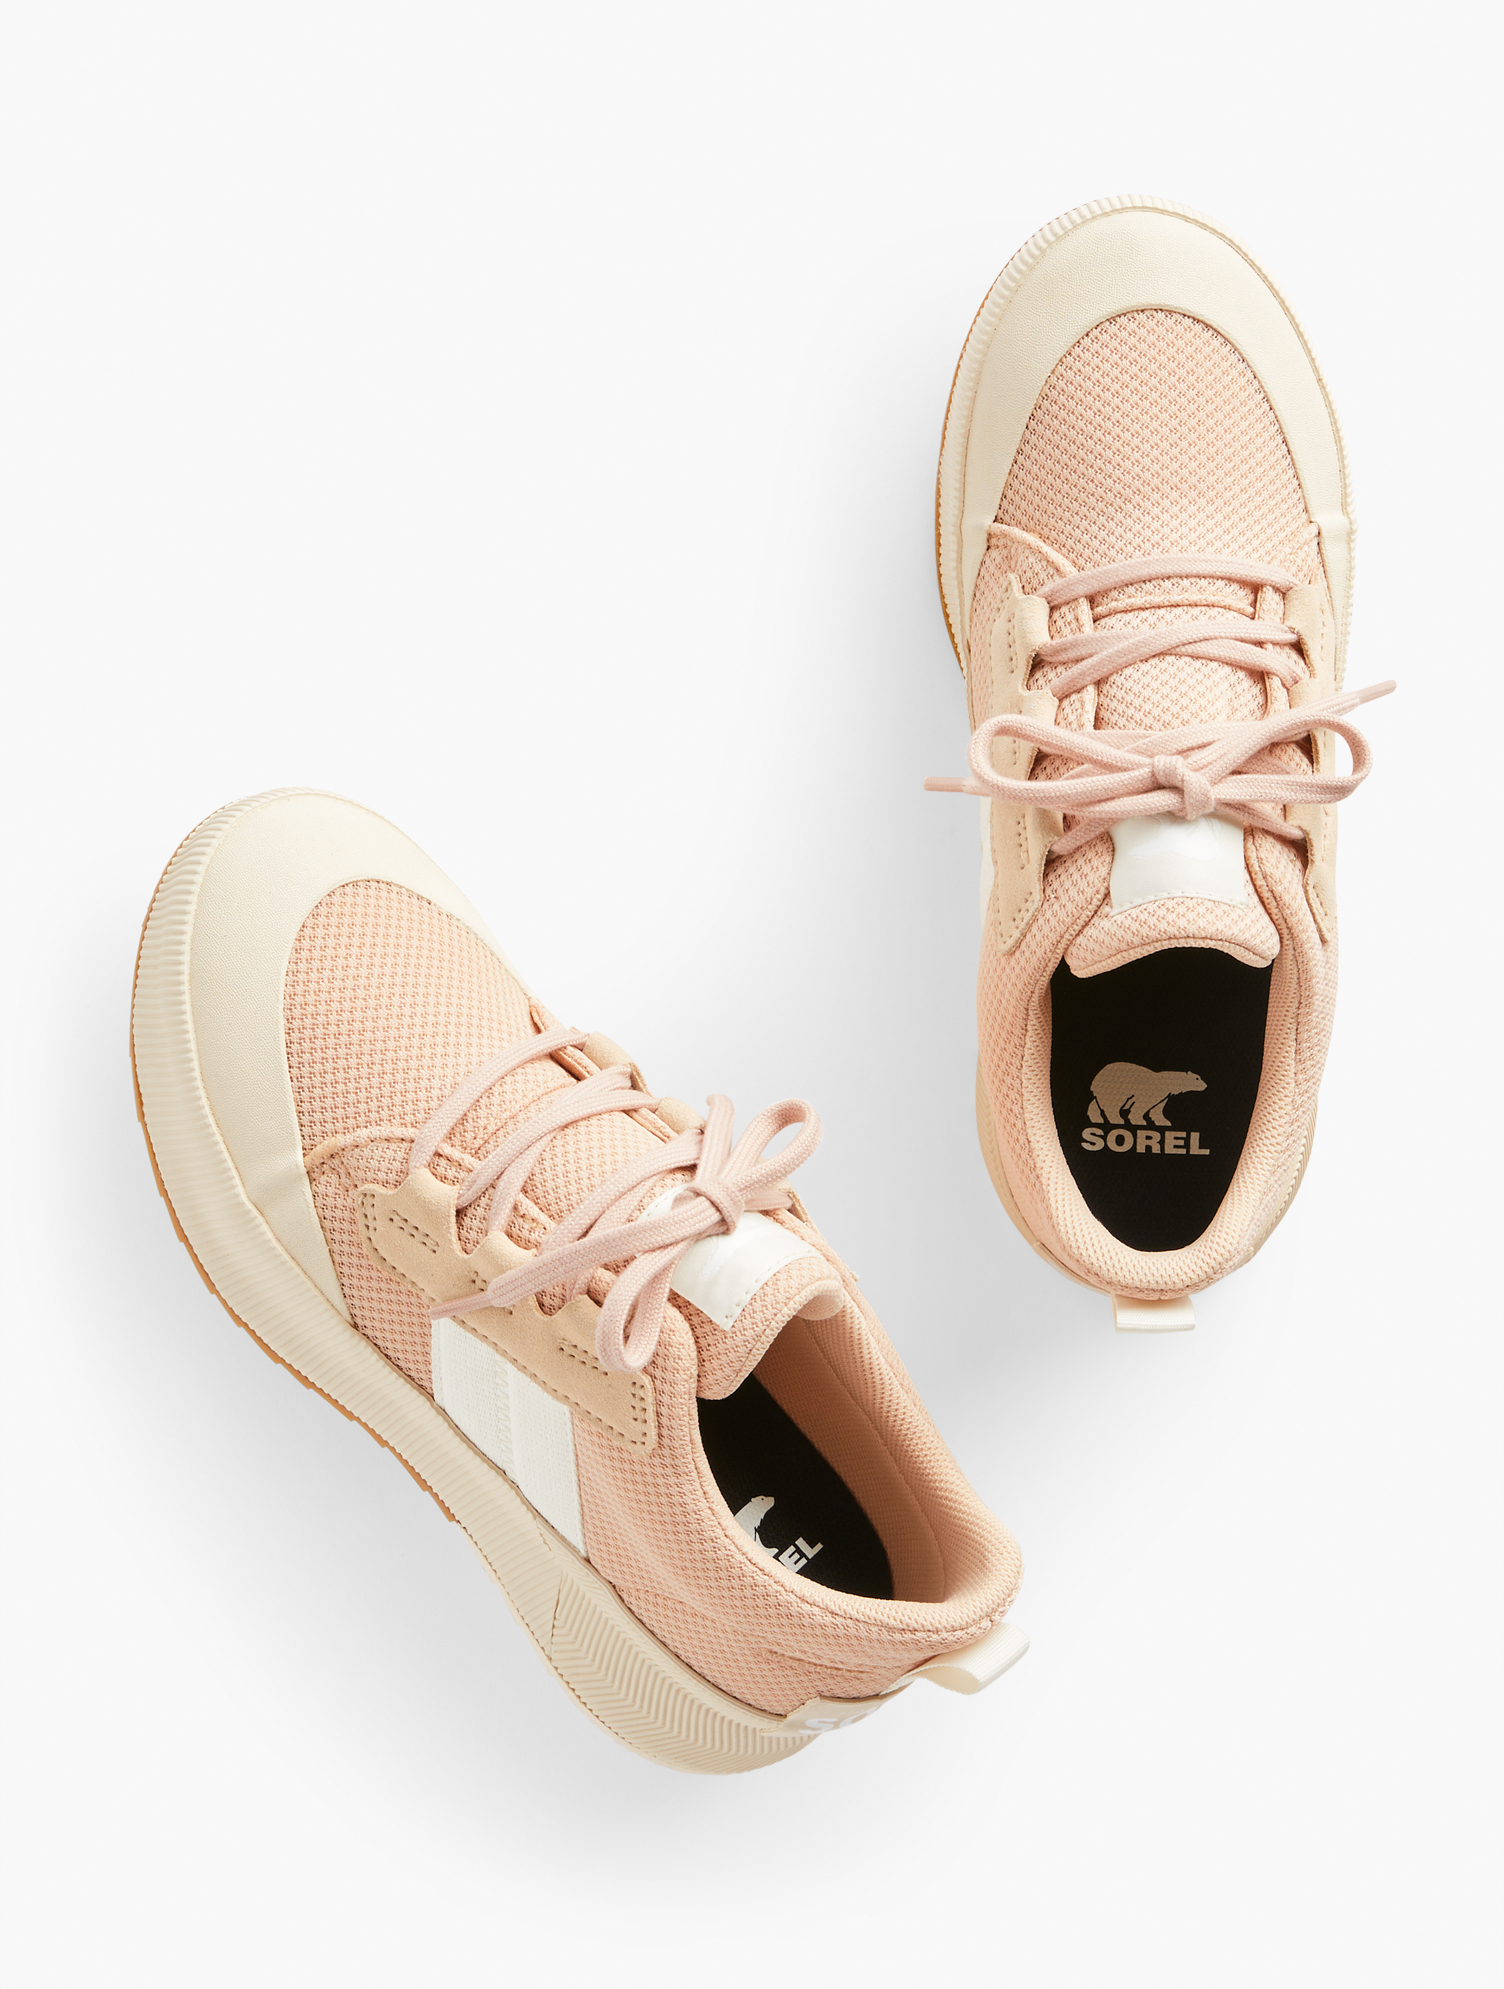 Talbots Out N Aboutâ¢ Waterproof Sneakers - Nova Sand/chalk - 9 1/2 M  In Nova Sand,chalk